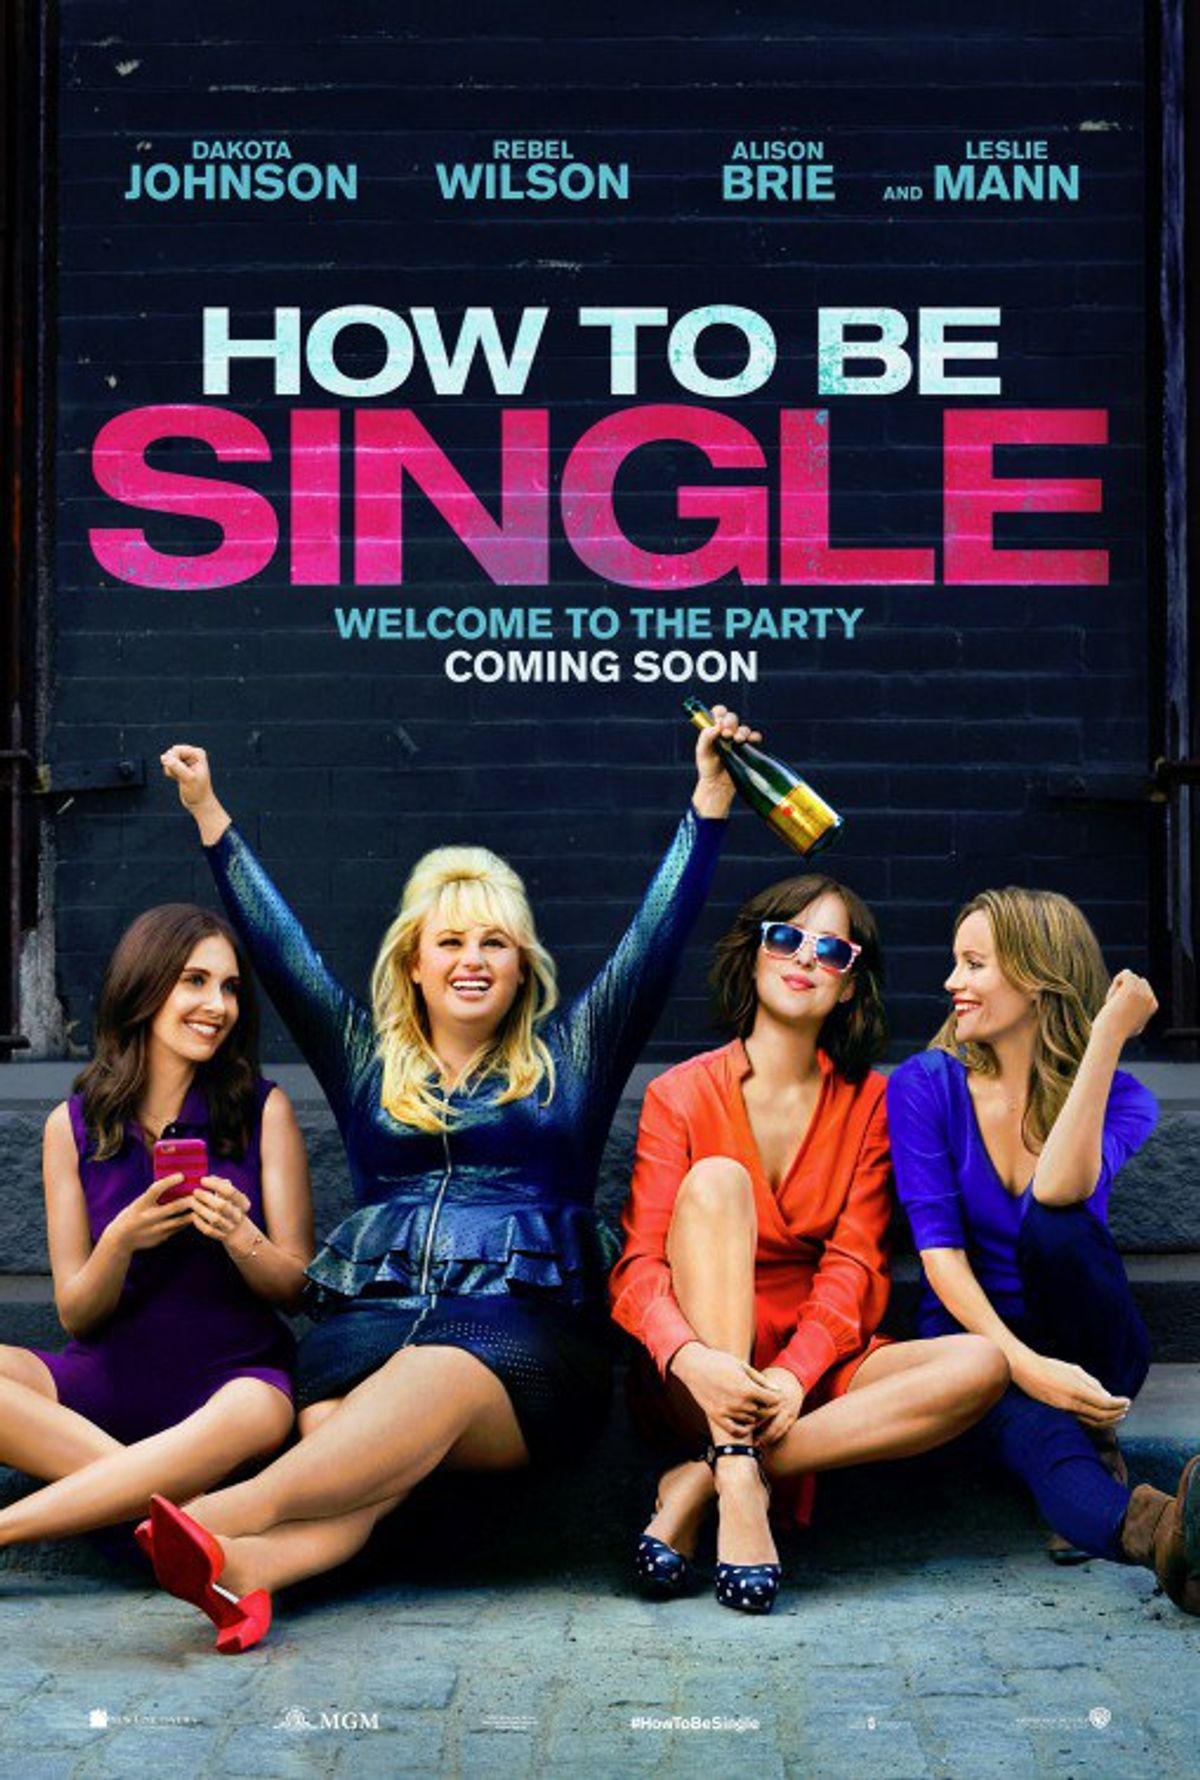 What I Learned From "How To Be Single"